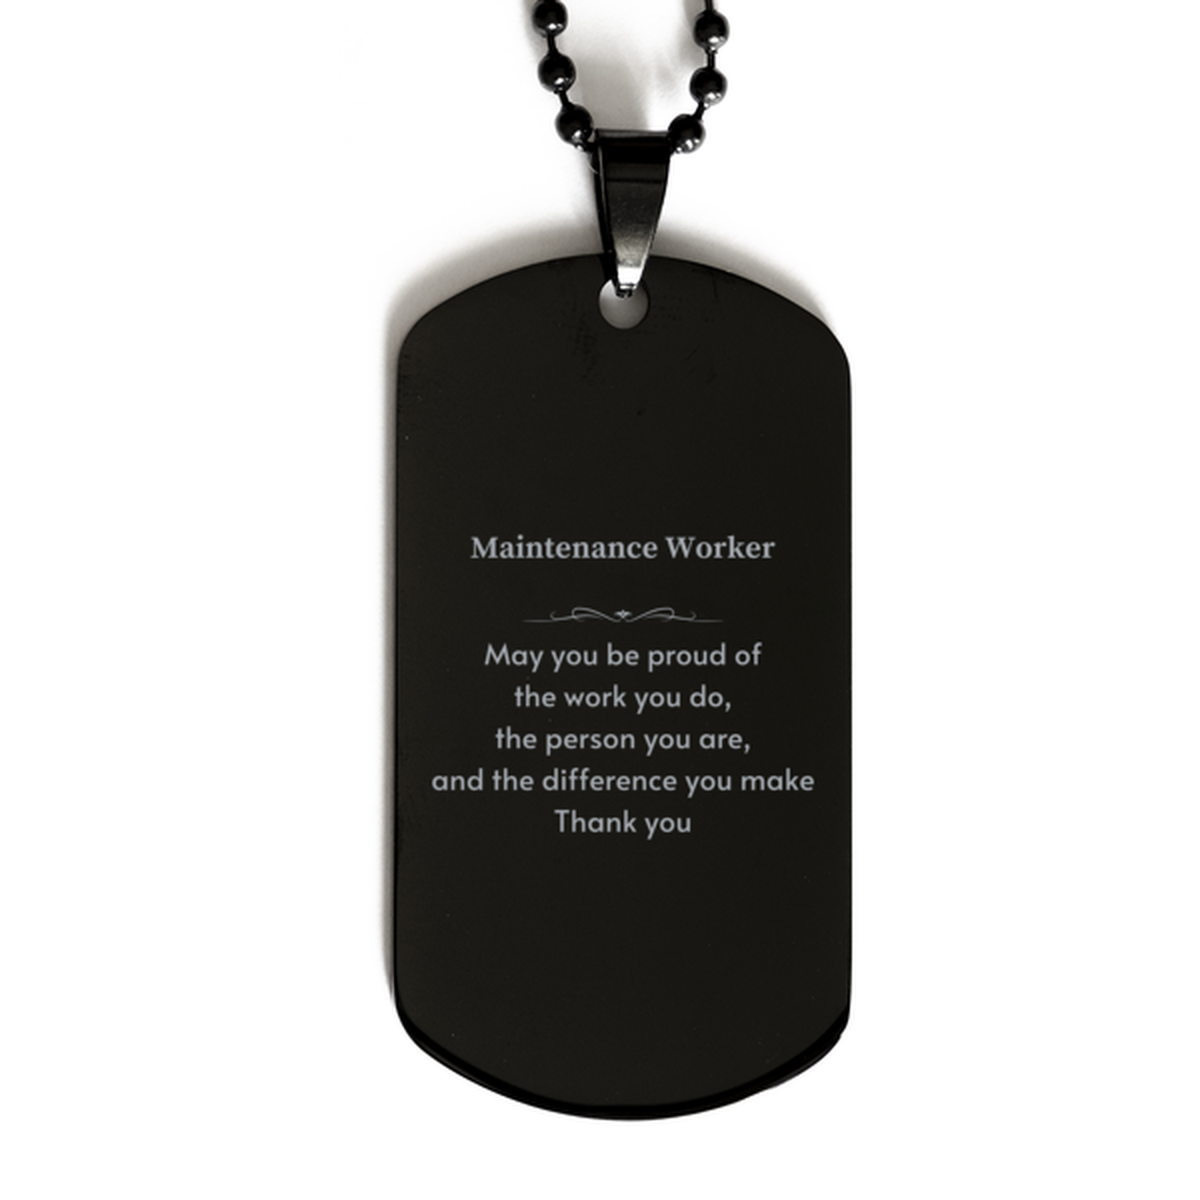 Heartwarming Black Dog Tag Retirement Coworkers Gifts for Maintenance Worker, Maintenance Worker May You be proud of the work you do, the person you are Gifts for Boss Men Women Friends